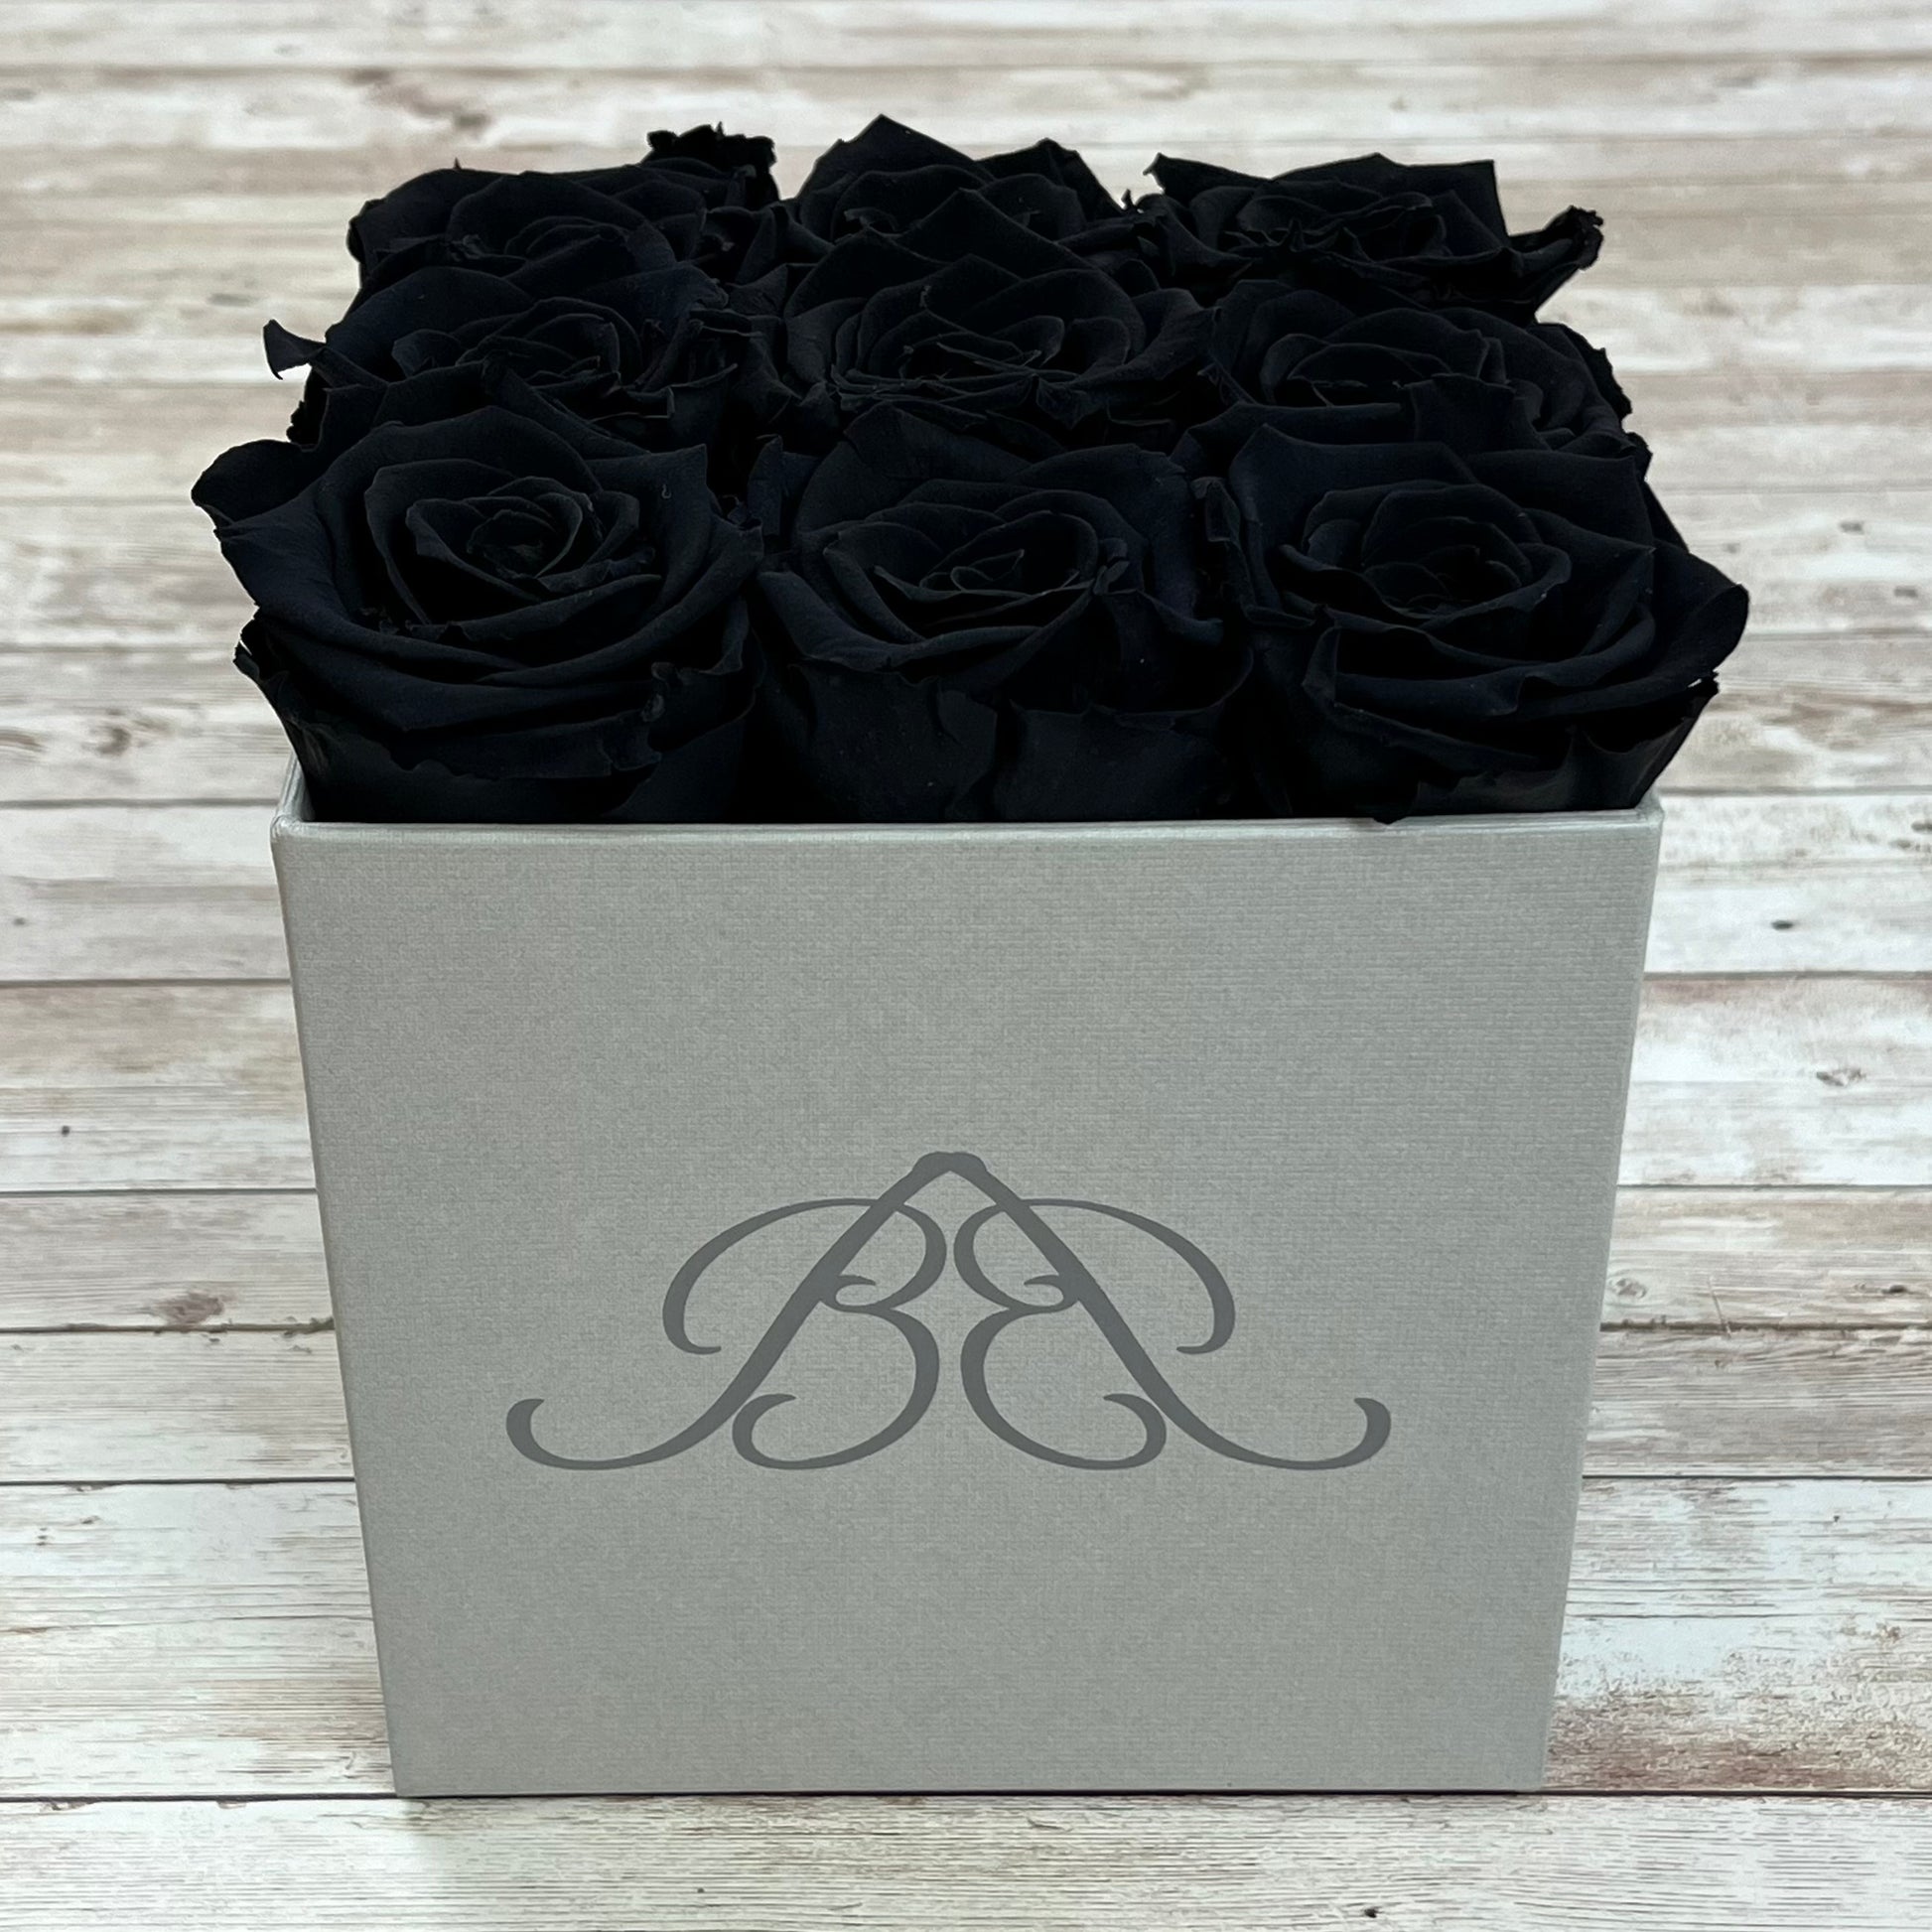 Grey Square Infinity Rose Box - Infinity Roses - Black One Year Roses - Rose Colours divider-Midnight Black